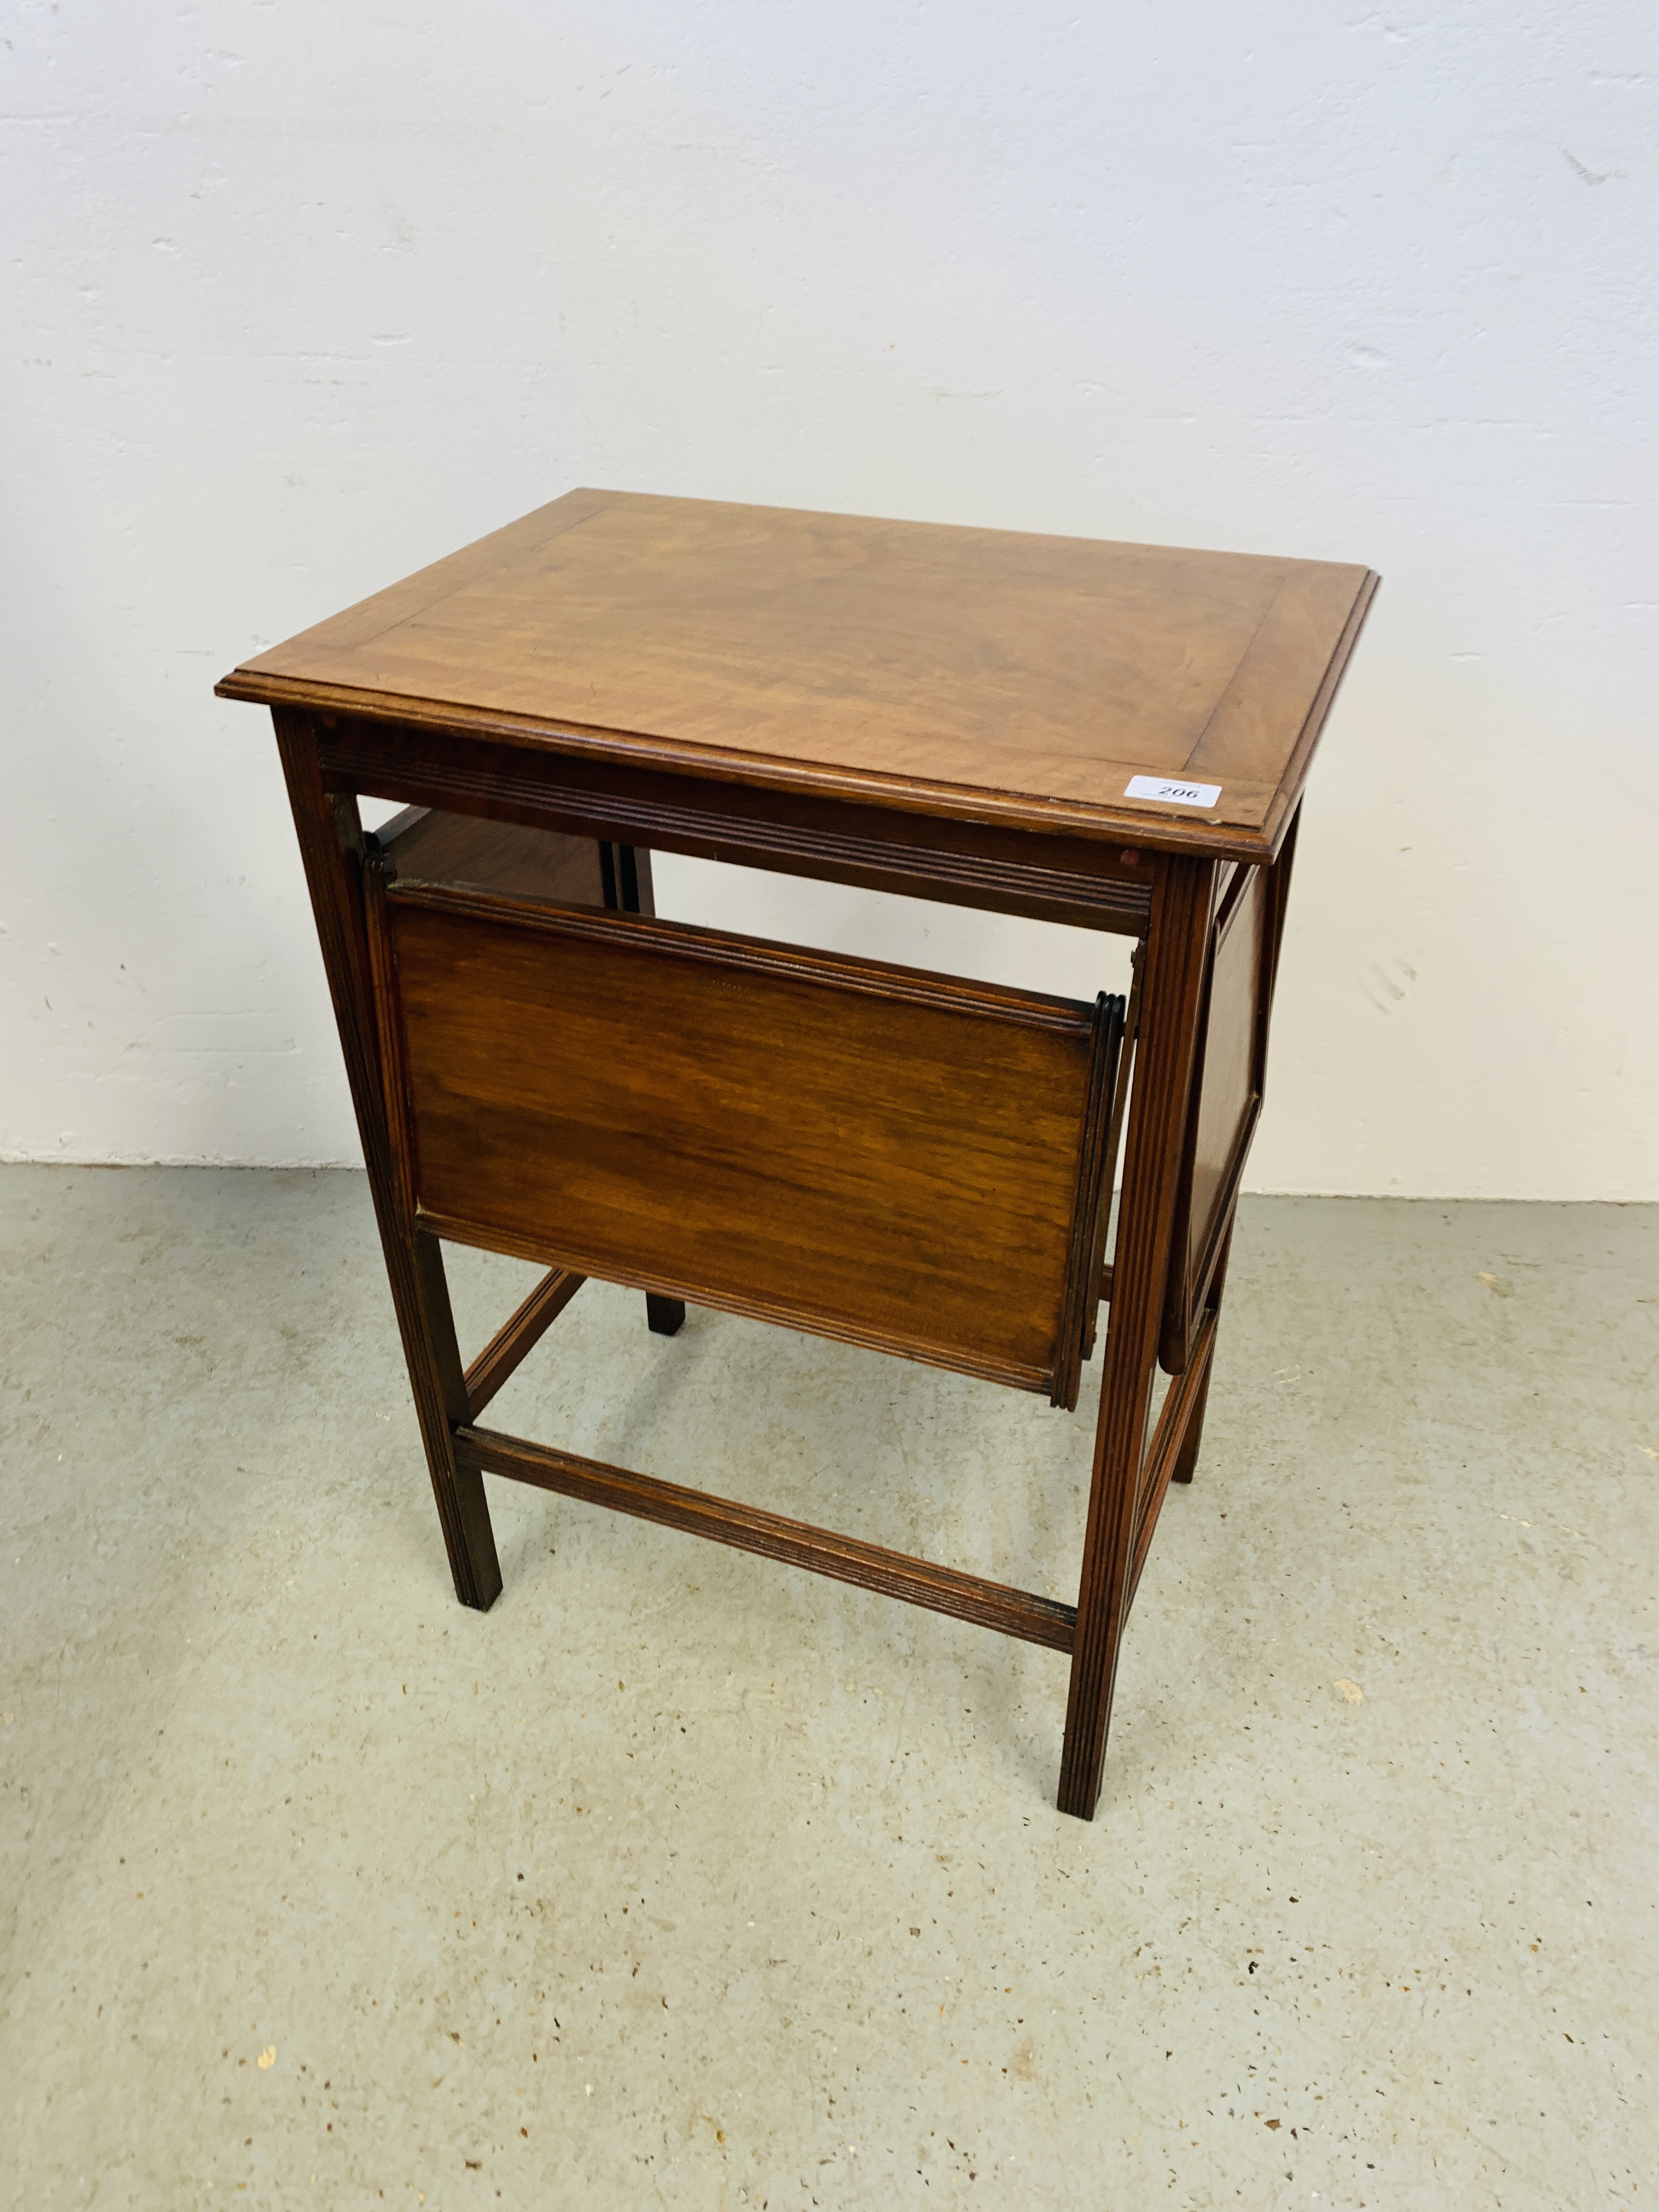 EDWARDIAN MAHOGANY OCCASIONAL TABLE WITH CANTILEVER TRAYS. - Image 5 of 5